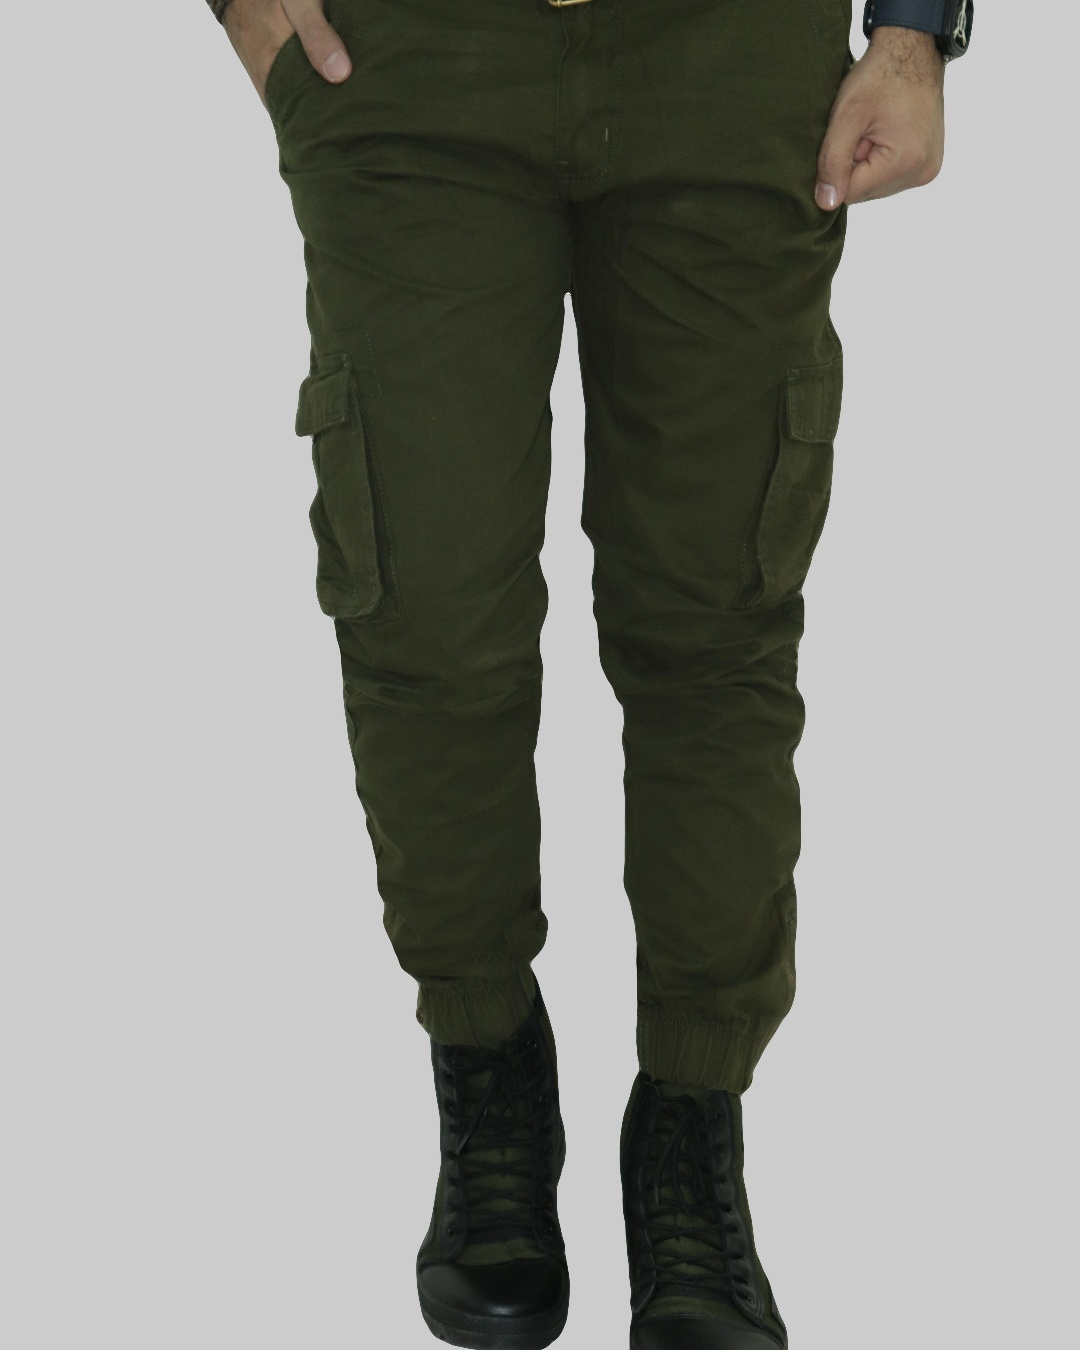 Green Men's Cargo Pants − Now: Shop up to −64% | Stylight